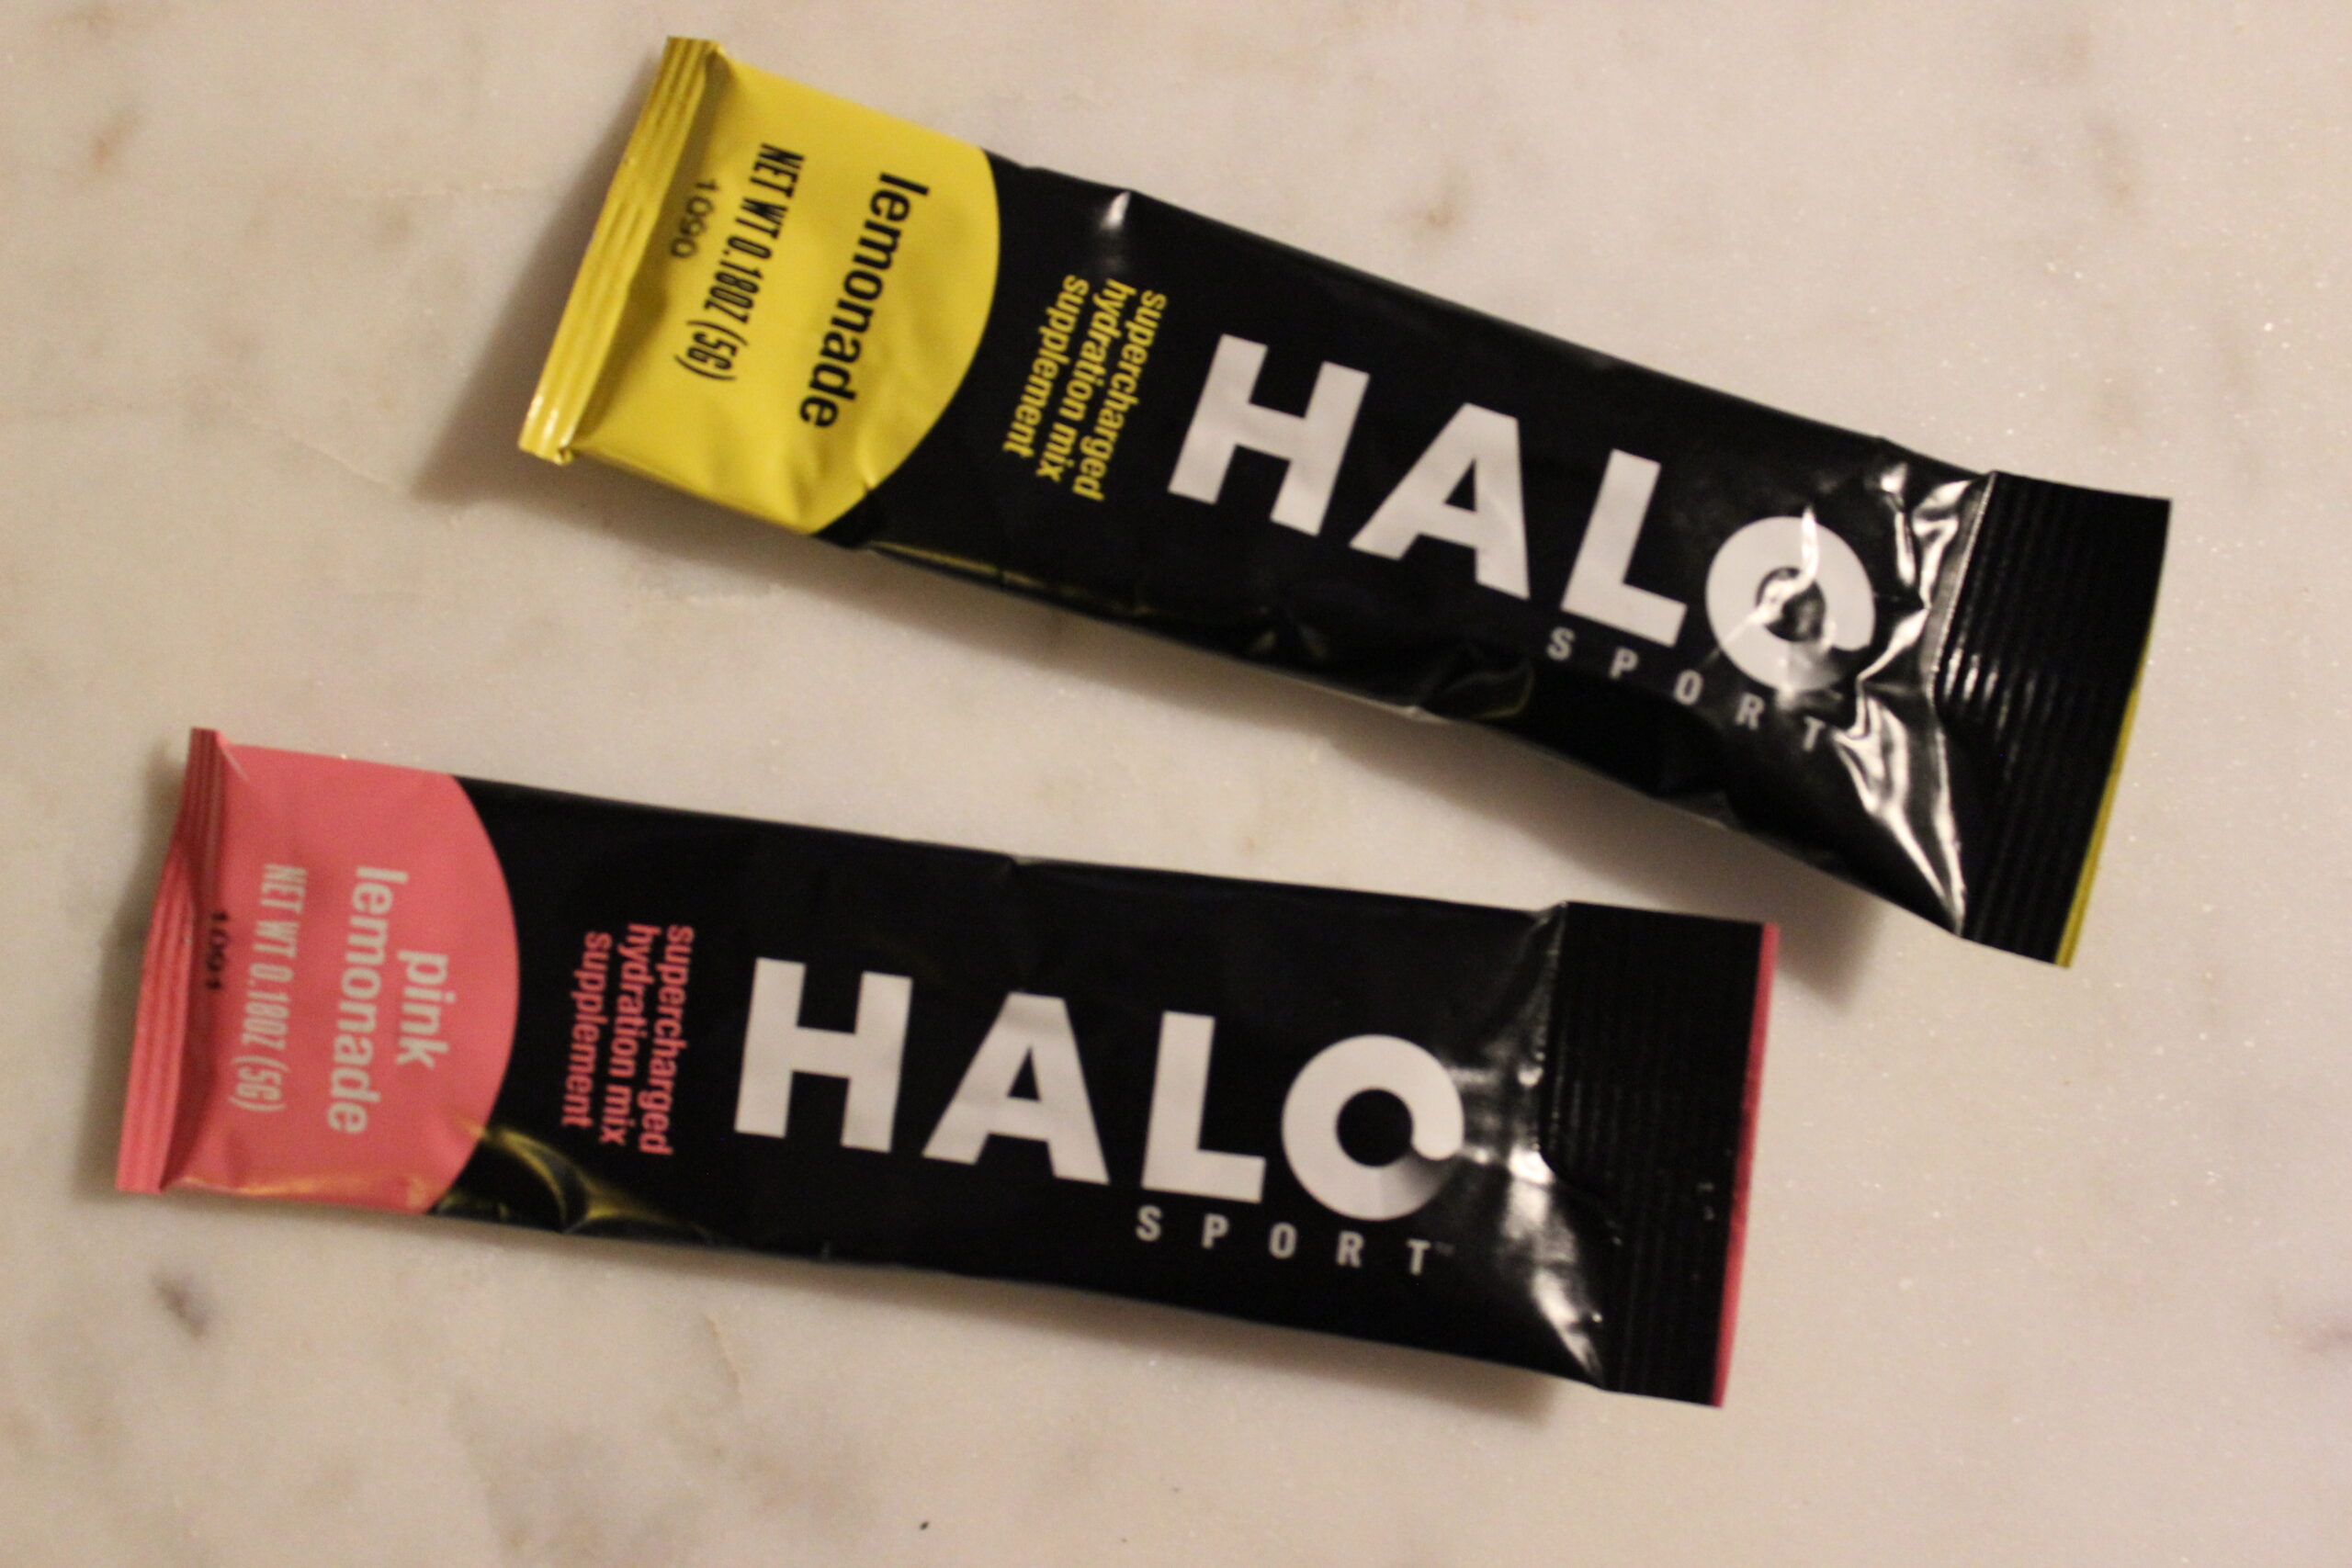 HALO Hydration LAUNCHES 'HALO On-The-Go' Electrolyte Powder Sticks